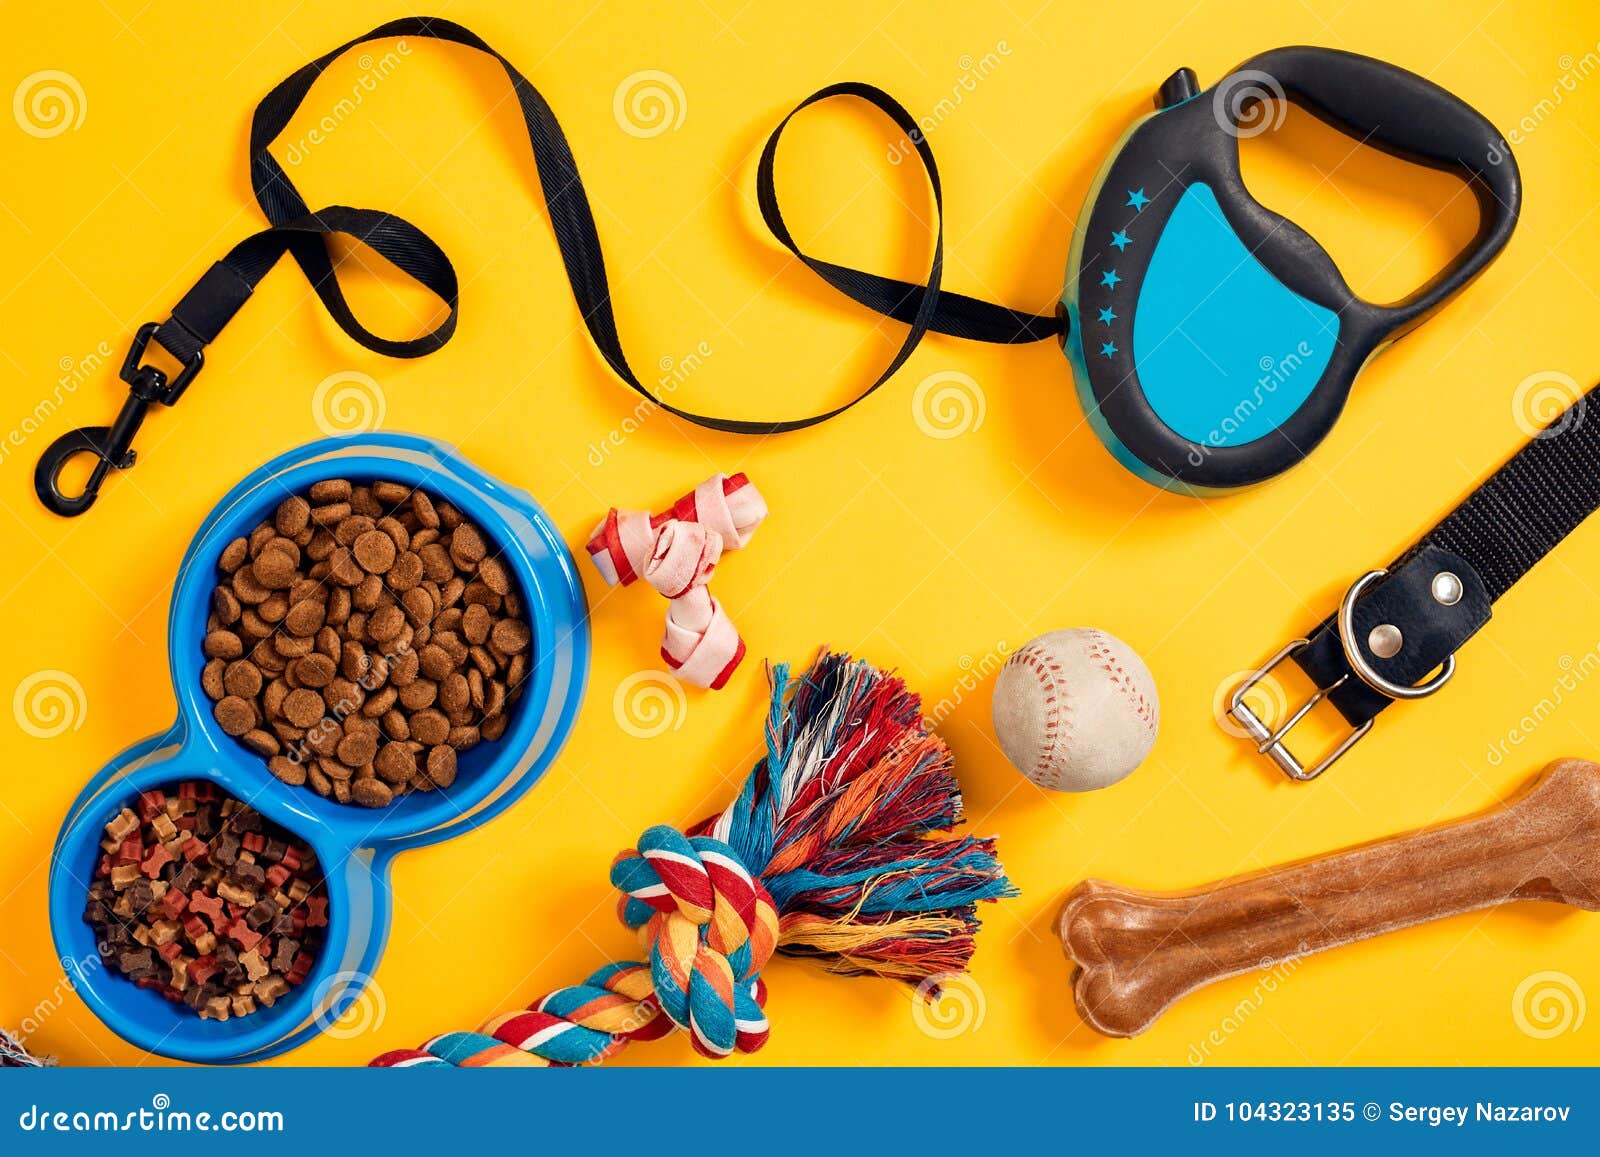 dog accessories on yellow background. top view. pets and animals concept